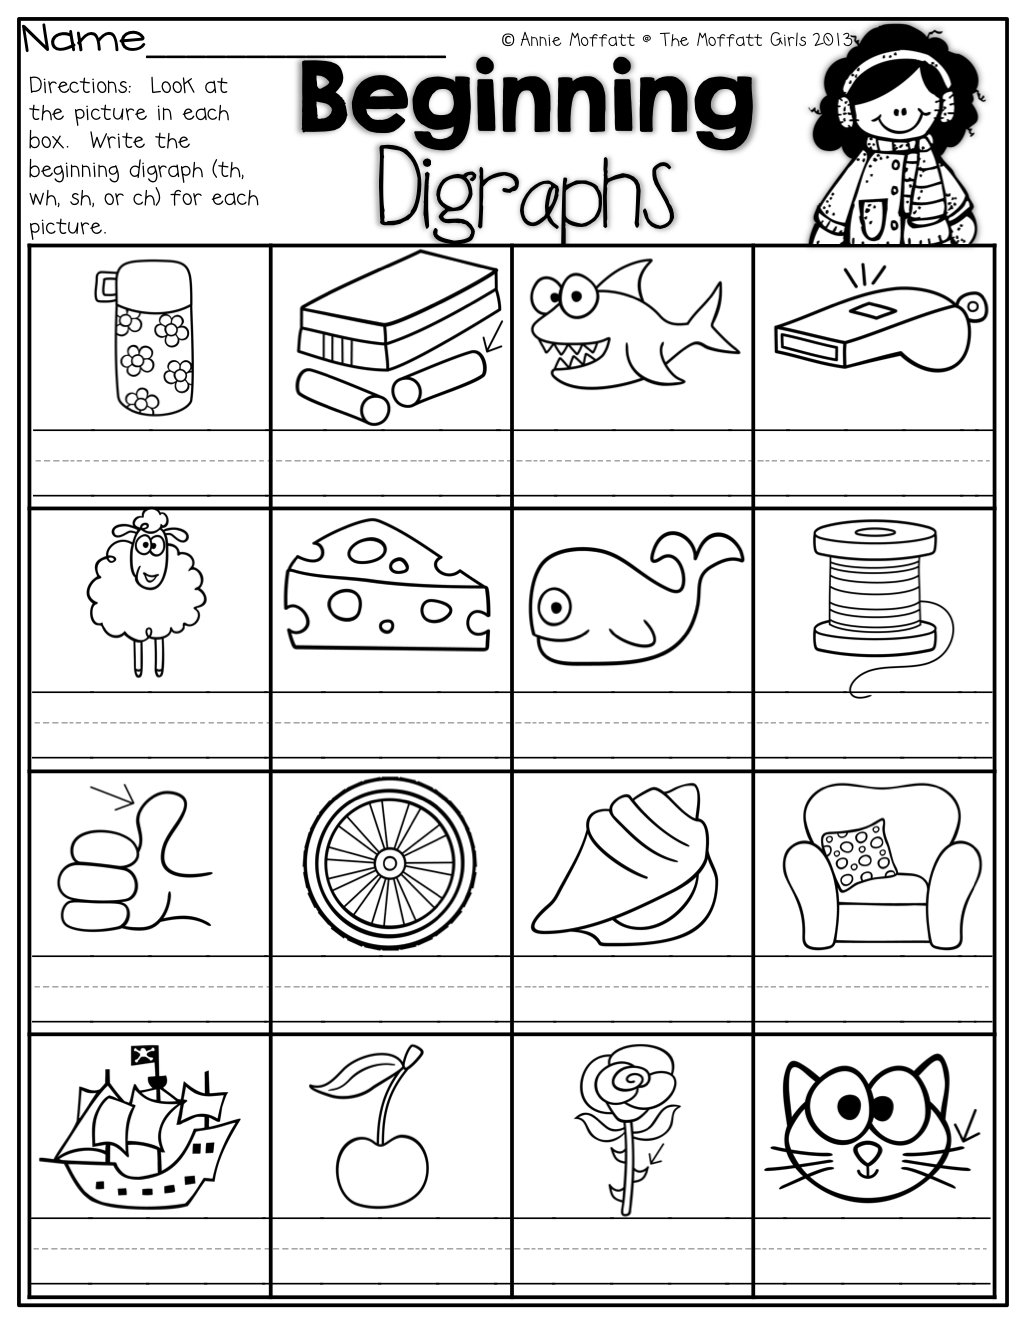 Beginning Digraphs! Write The Beginning Digraphs For Each Picture - Free Printable Ch Digraph Worksheets